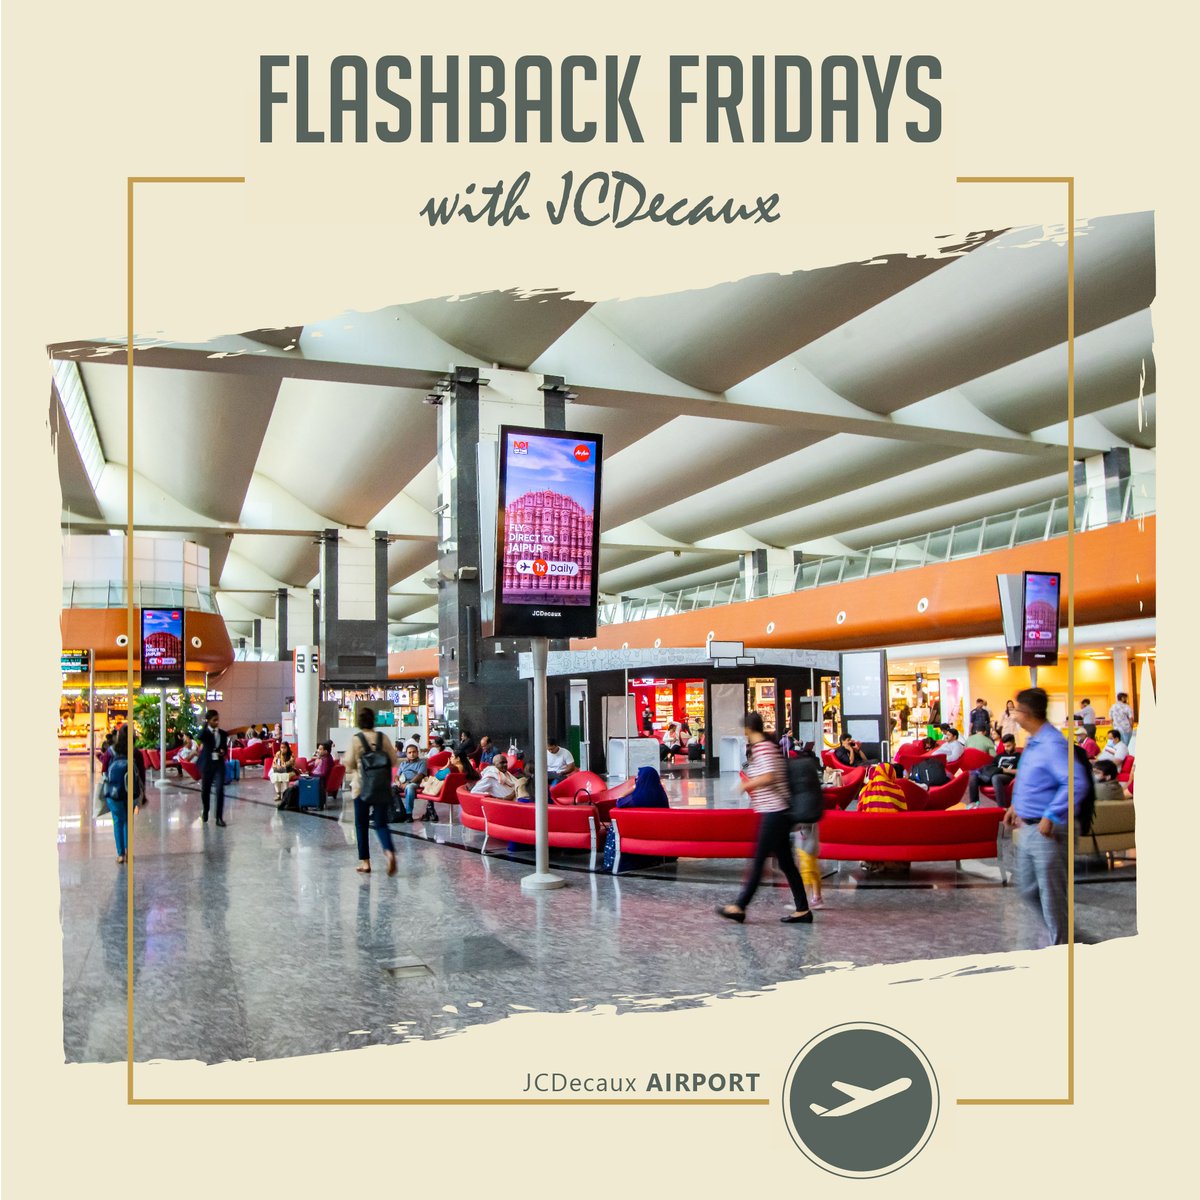 Flying back in time with Air Asia this flashback Friday ✈

#FlashbackFriday #FlashbackFriday  #JCDecaux #JCDecauxIndia #JCDecauxIndia #OutdoorAdvertising #KIAB #JCDecauxCreativity #JCDecauxBranding #ooh #advertisingagency #outdooradvertising #creativeads #marketingcampaigns